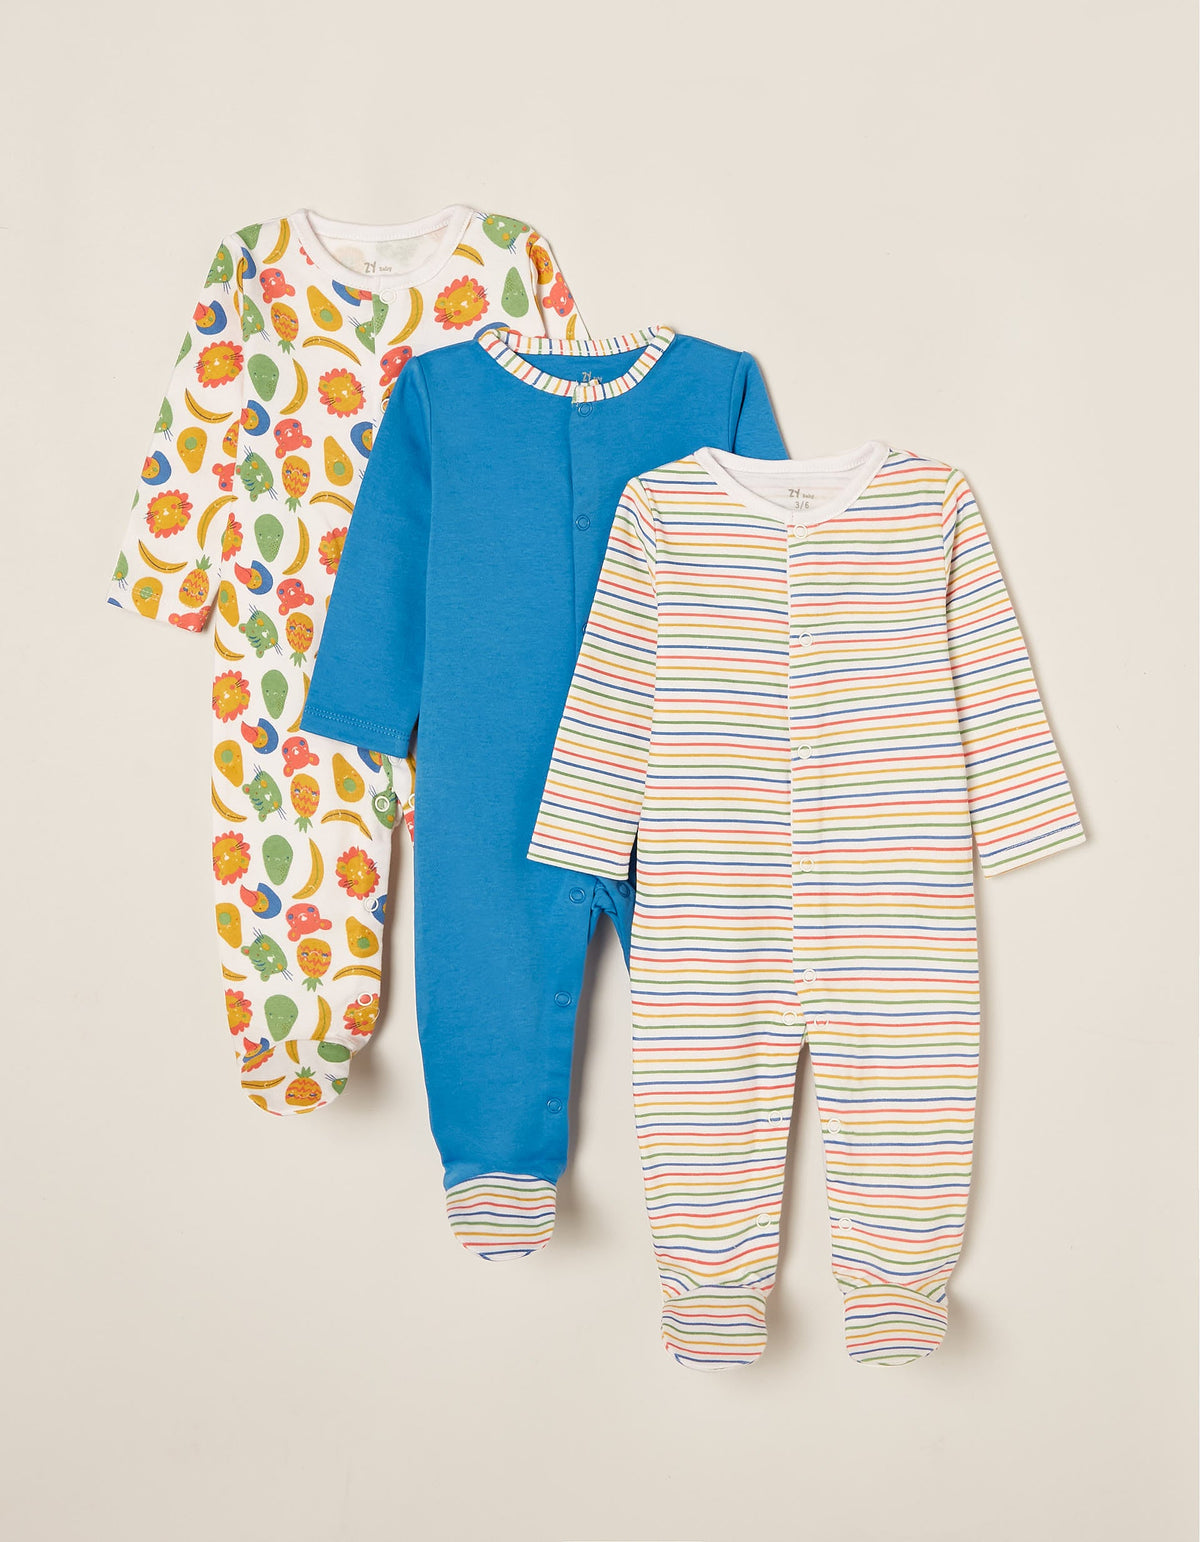 Zippy Baby Boy 'Tropical' 3 Pack Sleepsuits